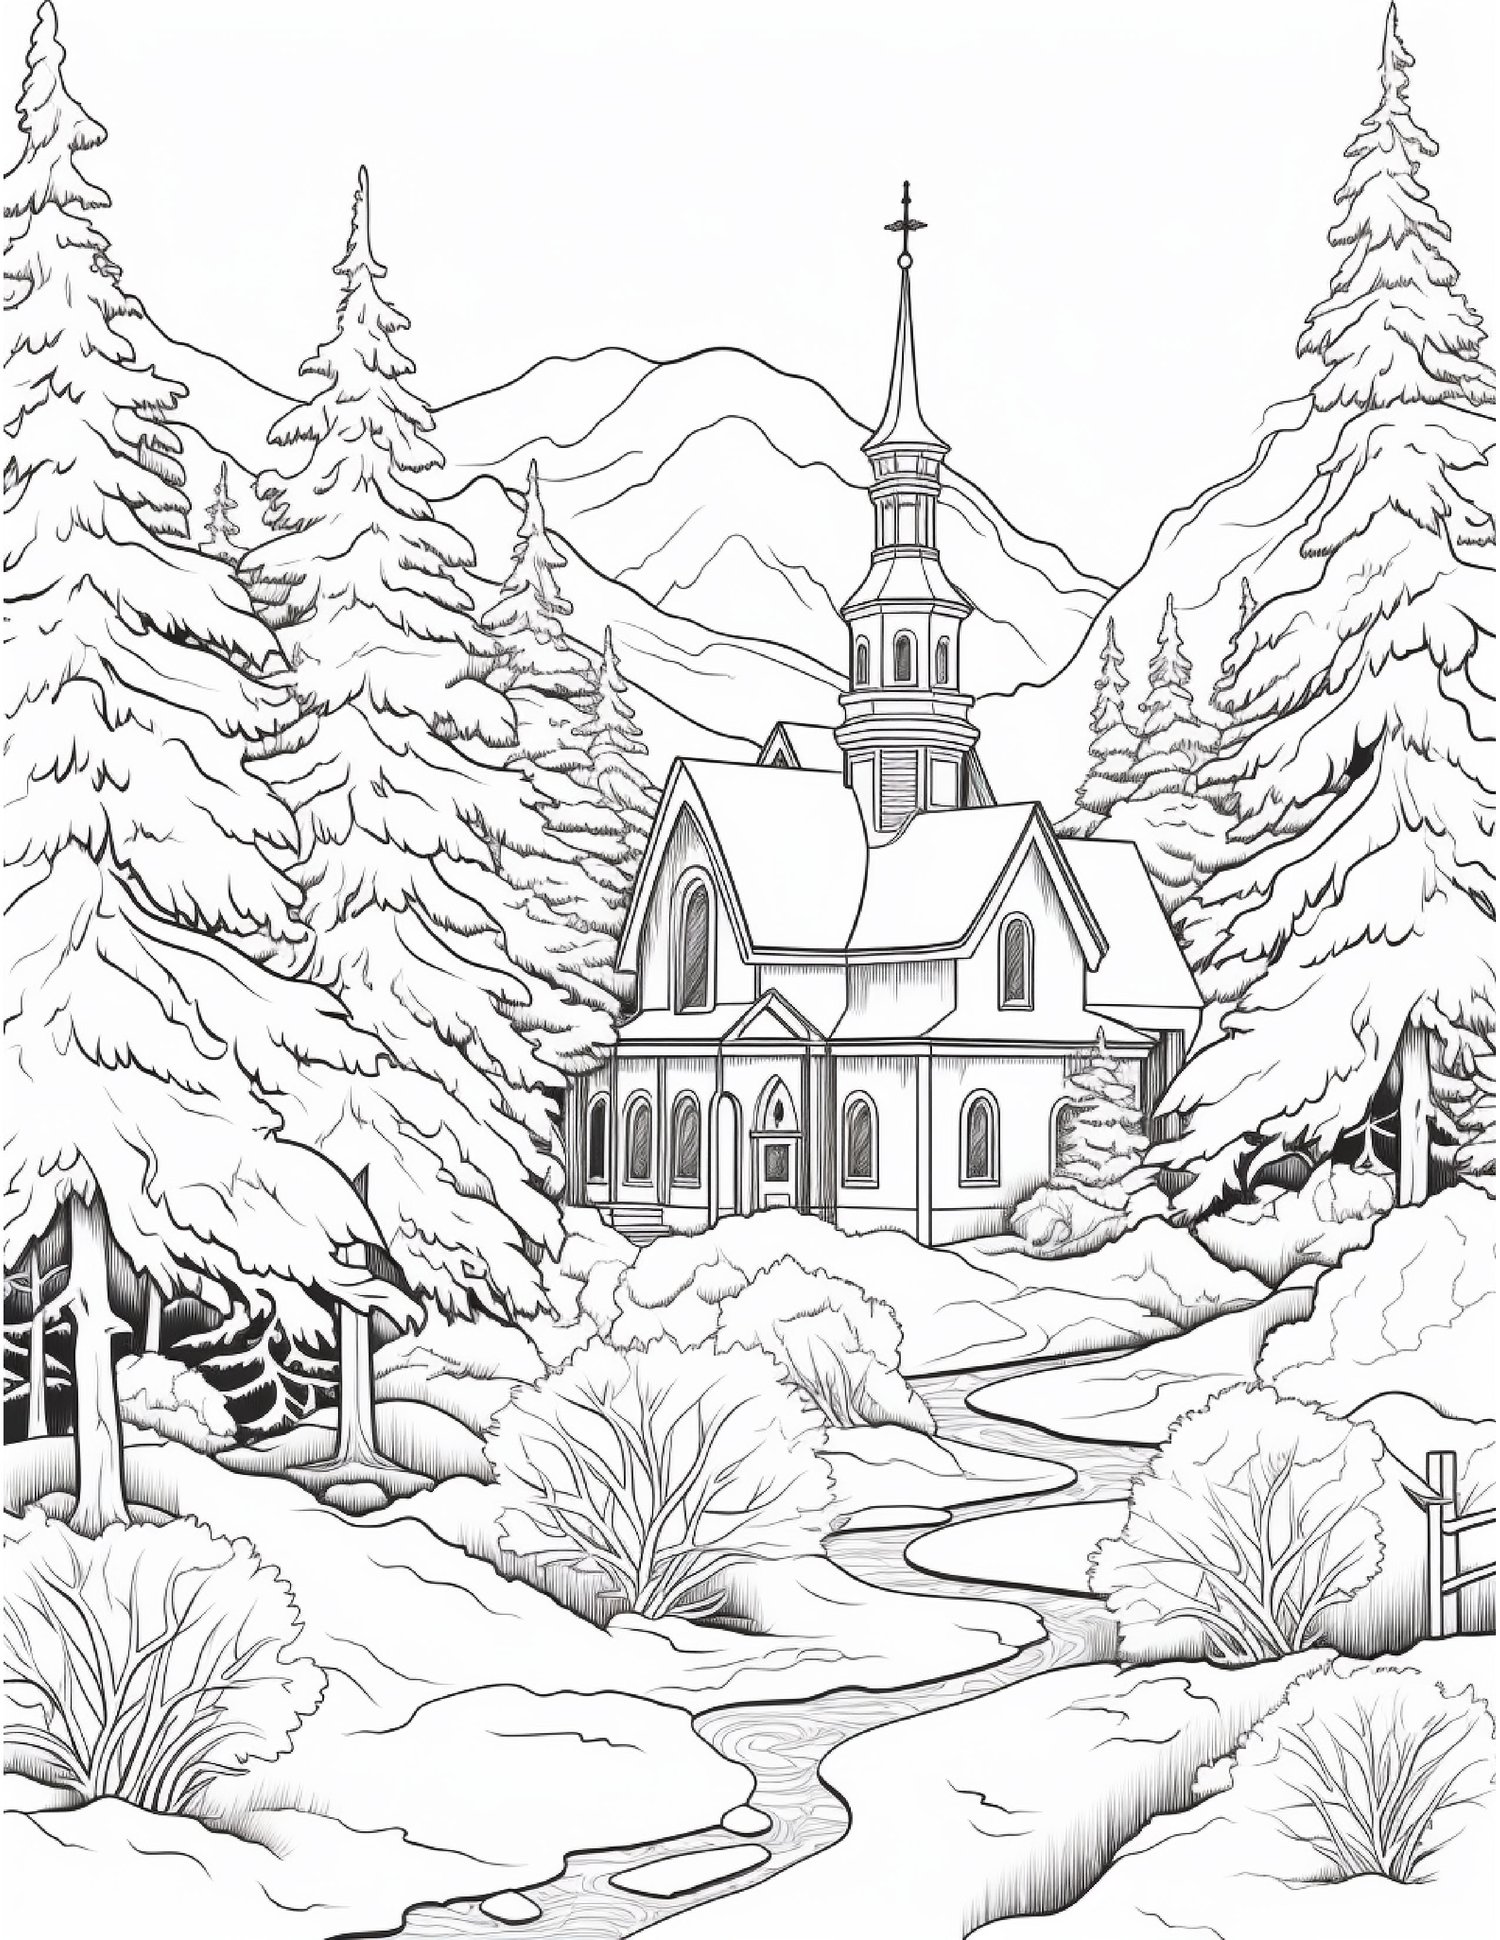 Winter house coloring pages for adults